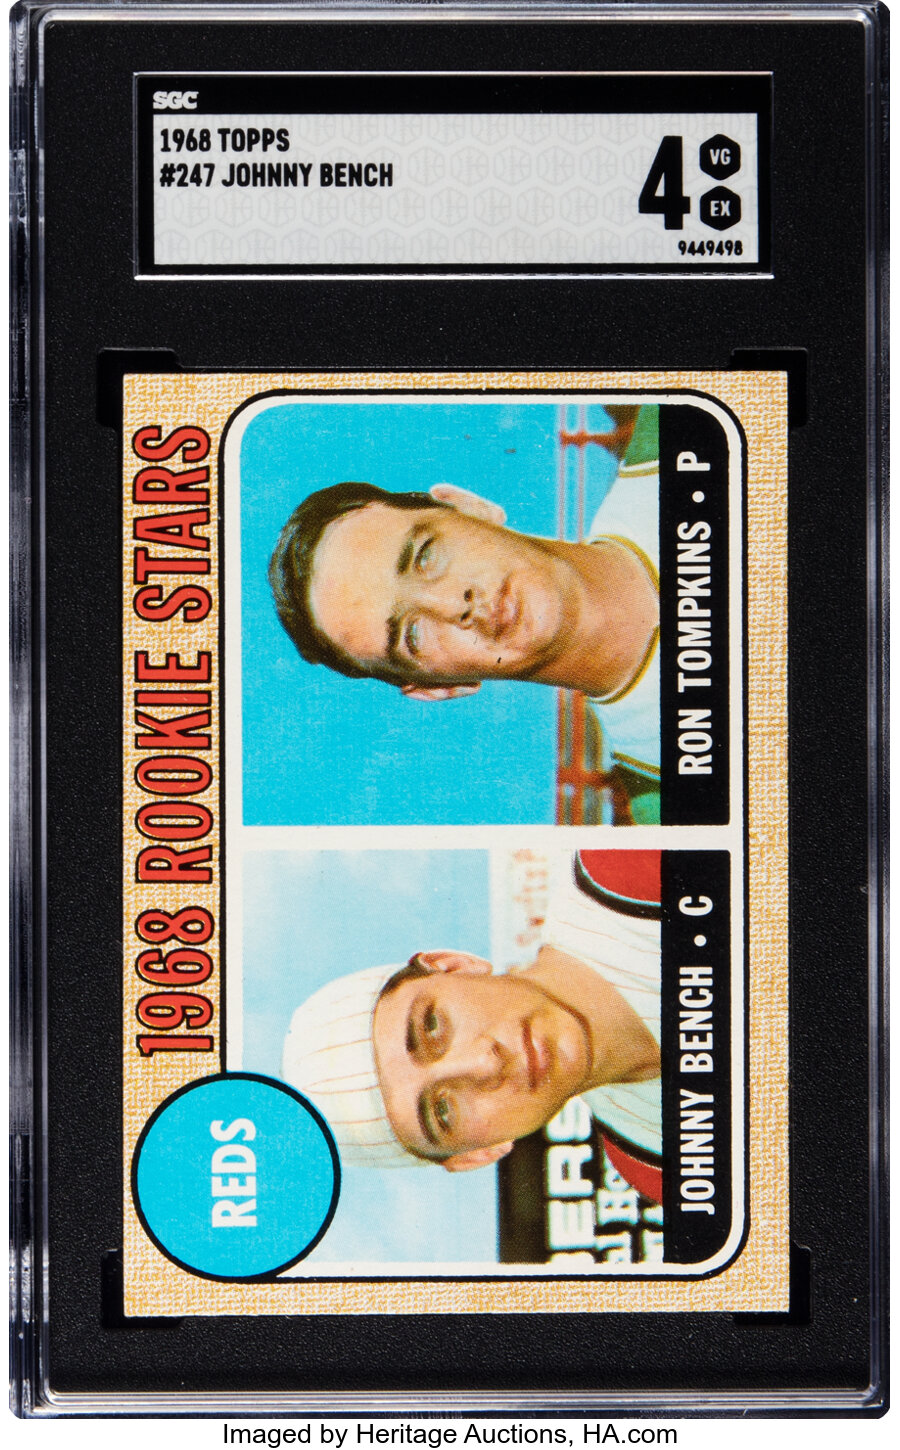 1968 Topps Johnny Bench - Reds Rookies #247 SGC VG-EX 4